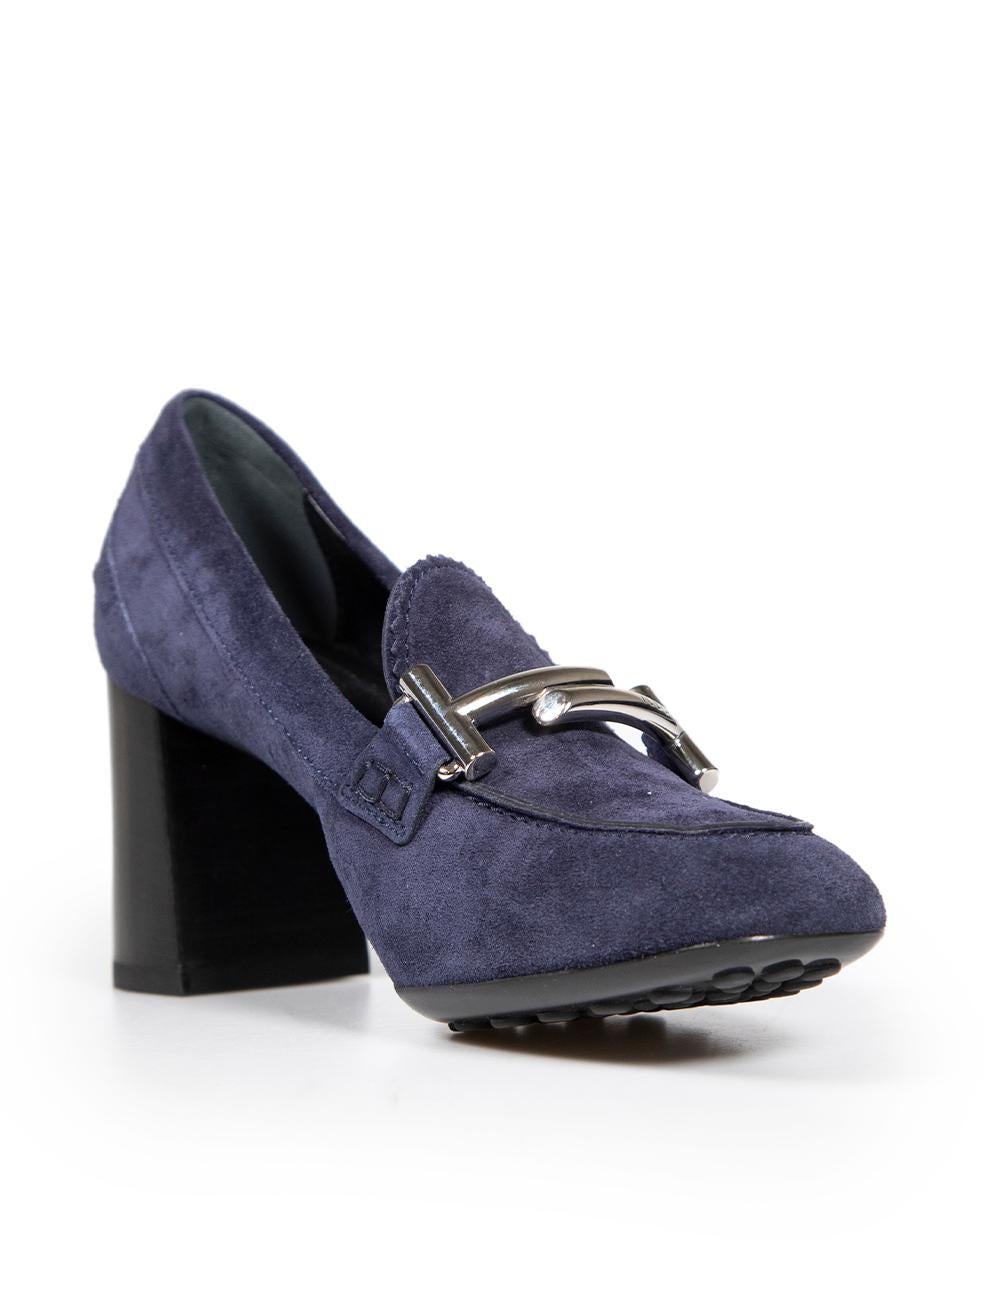 CONDITION is Never worn. No visible wear to pumps is evident on this new Tod's designer resale item.
 
 
 
 Details
 
 
 Navy
 
 Suede
 
 Slip on pumps
 
 Loafers style
 
 Silver tone hardware
 
 Double T buckle detail
 
 Square toe
 
 Micd block